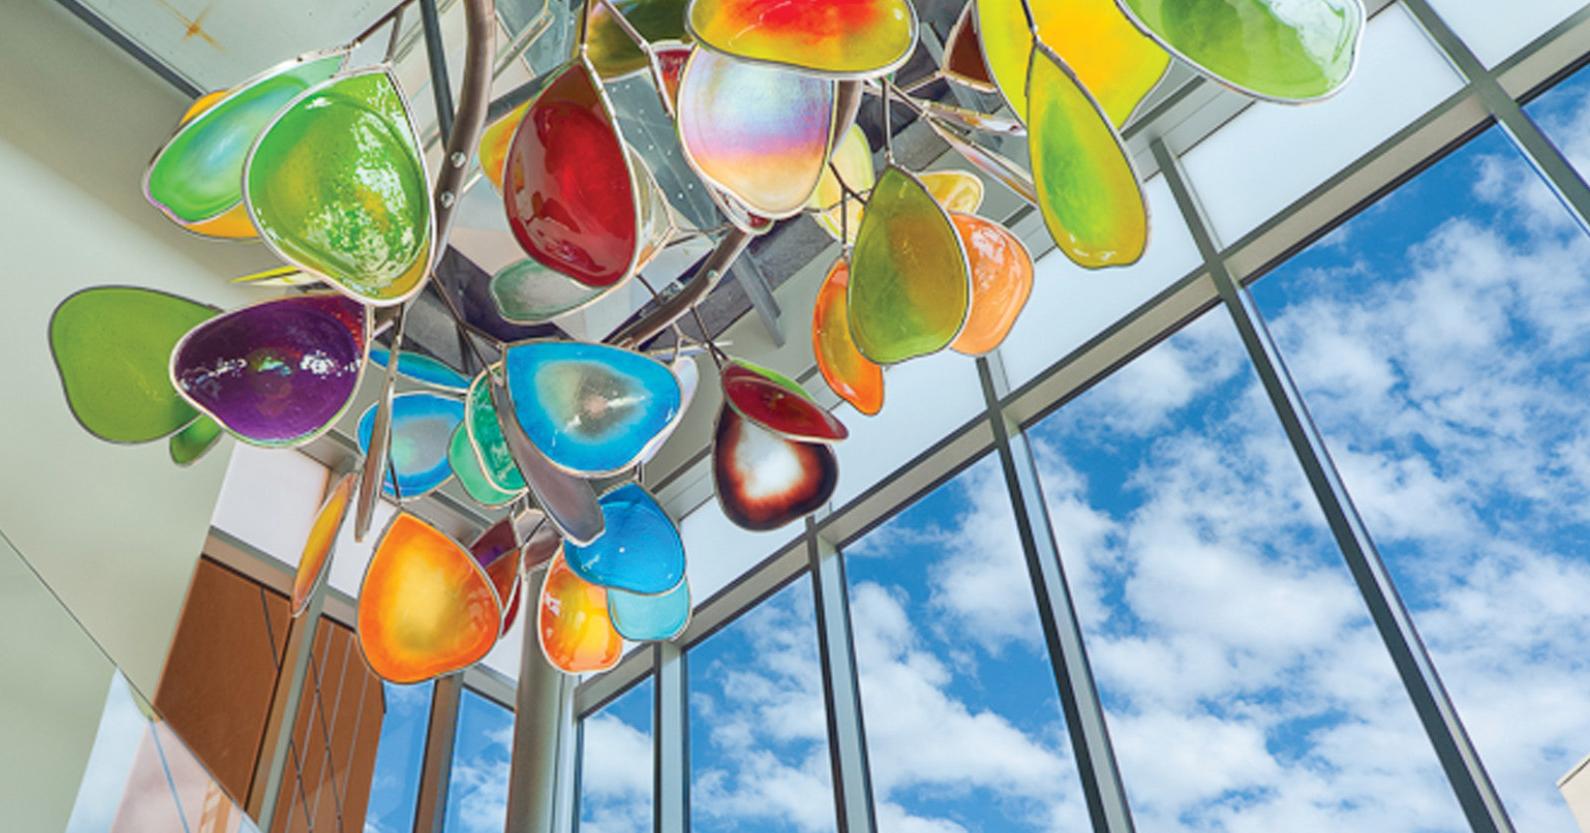 A sculpture suspended from the ceiling resembles a tree branch with leaves created from colored glass.